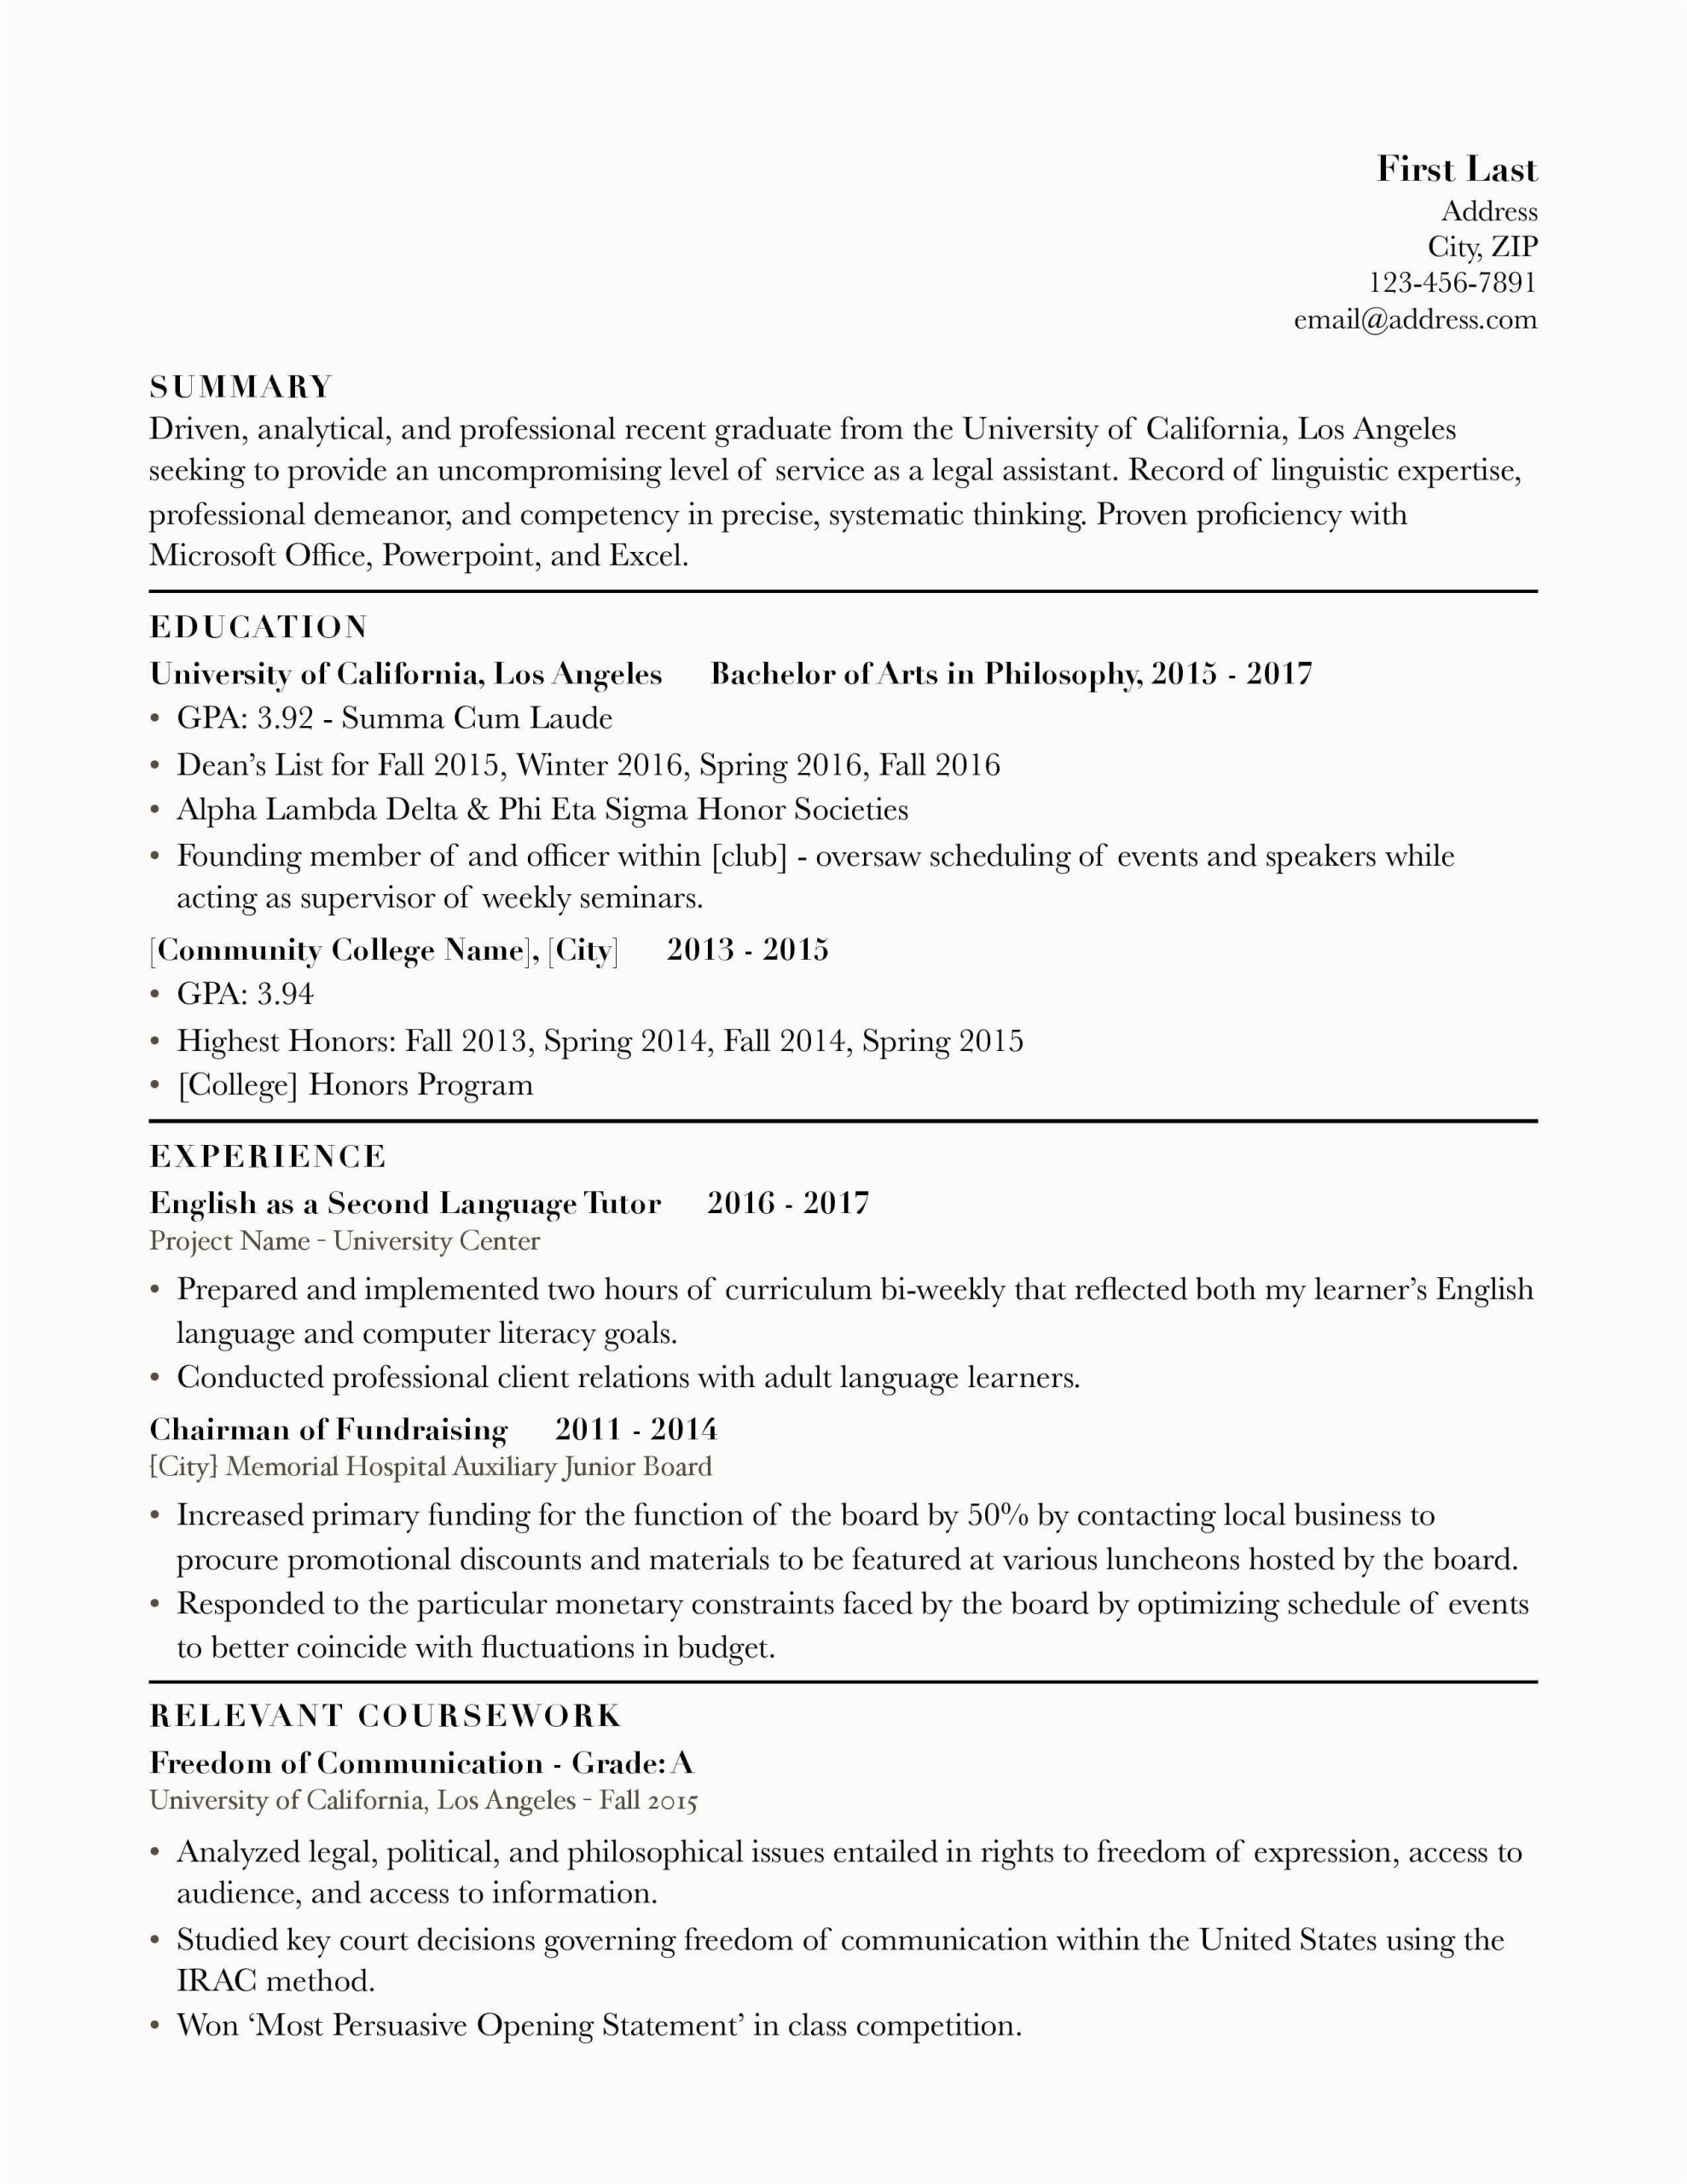 Sample Resumes for Law School Graduates [law & Policy] My Recent Graduate S Resume for A Position as A Legal